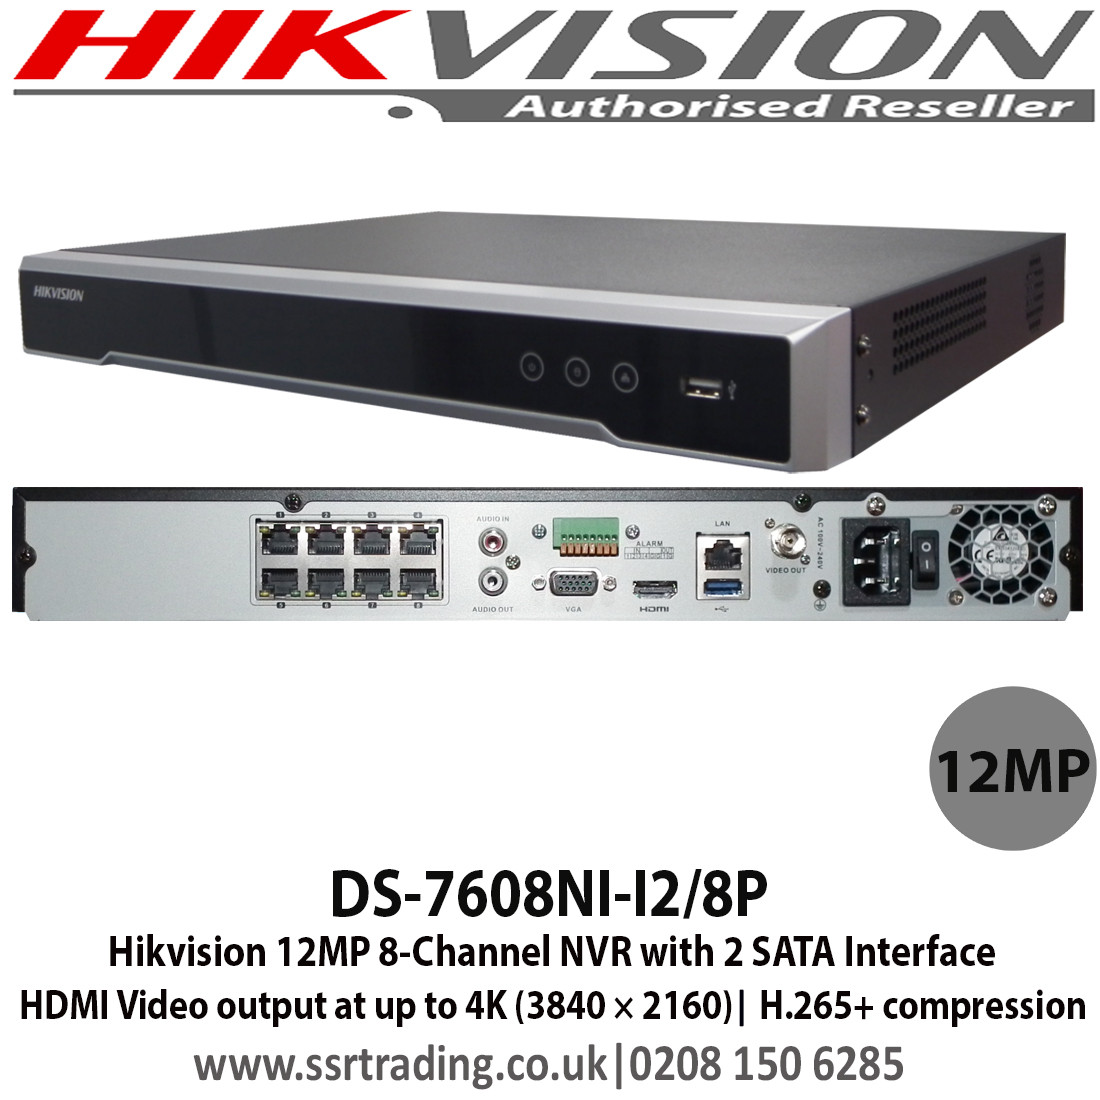 Hikvision 12MP NVR 8 Channel with 8 POE Port, 2 SATA Interface, HDMI Video  output at up to 4K (3840 × 2160) resolution - DS-7608NI-I2/8P - 3rd  (DS-7608NI-I2/8P - 3rd)